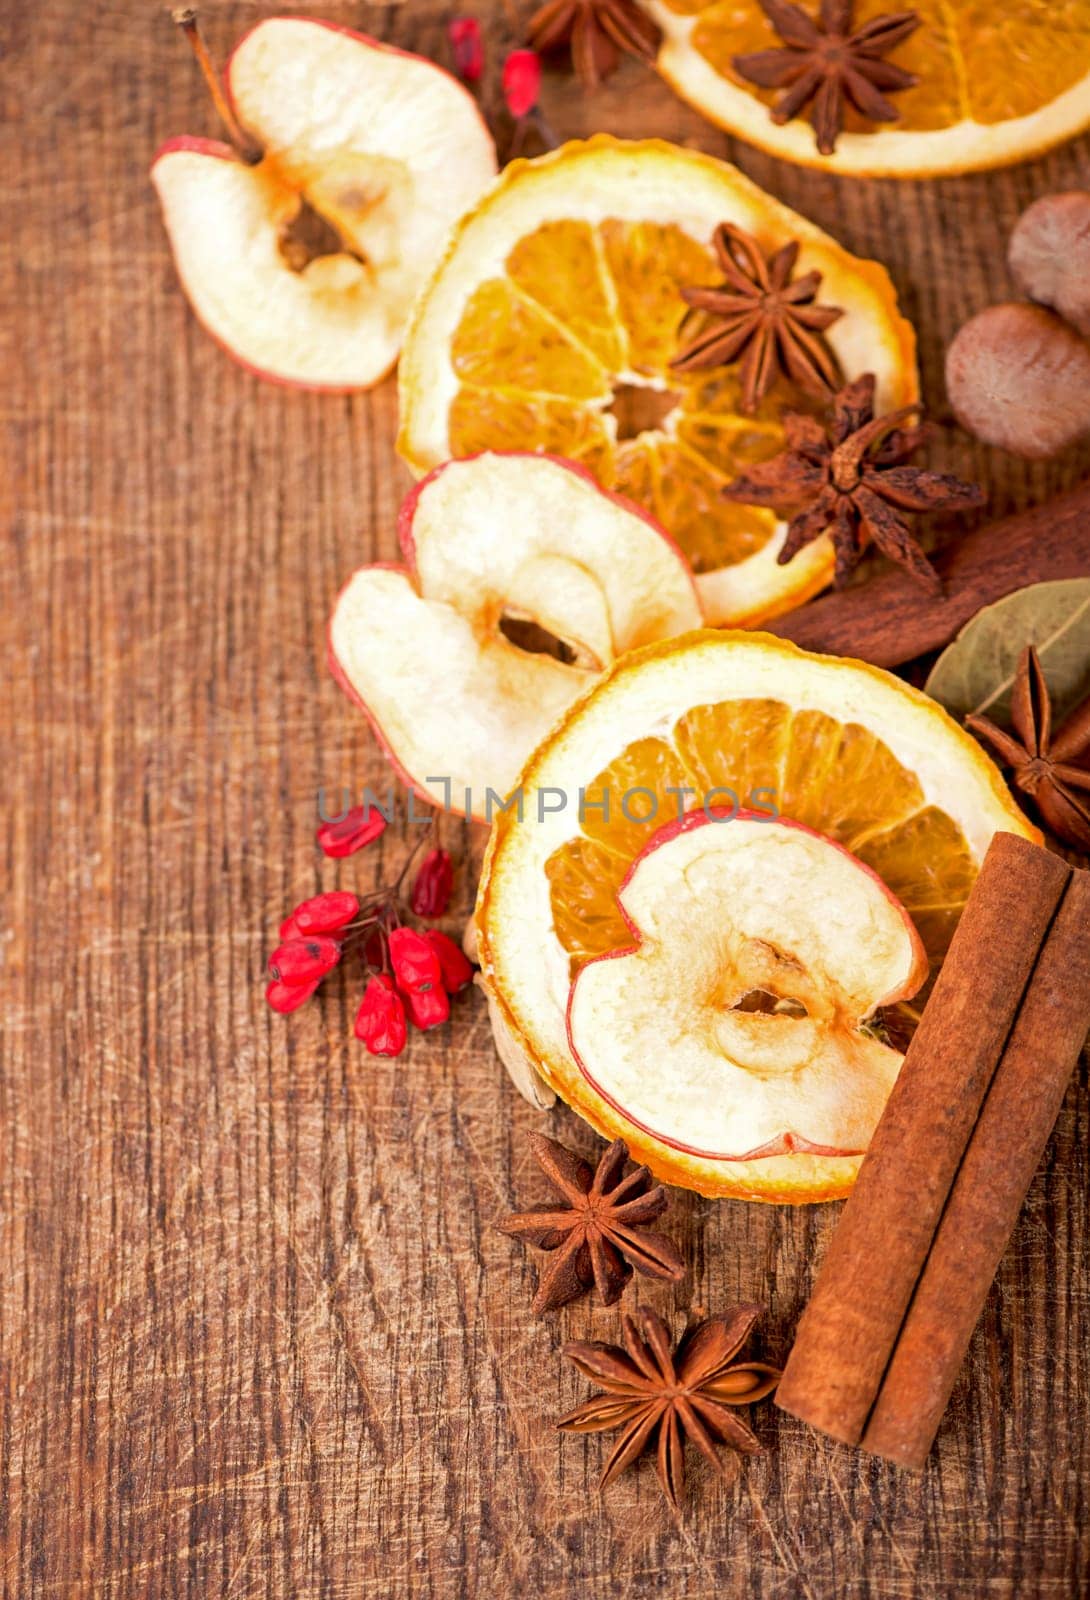 Christmas spices and dried orange sliceson by aprilphoto